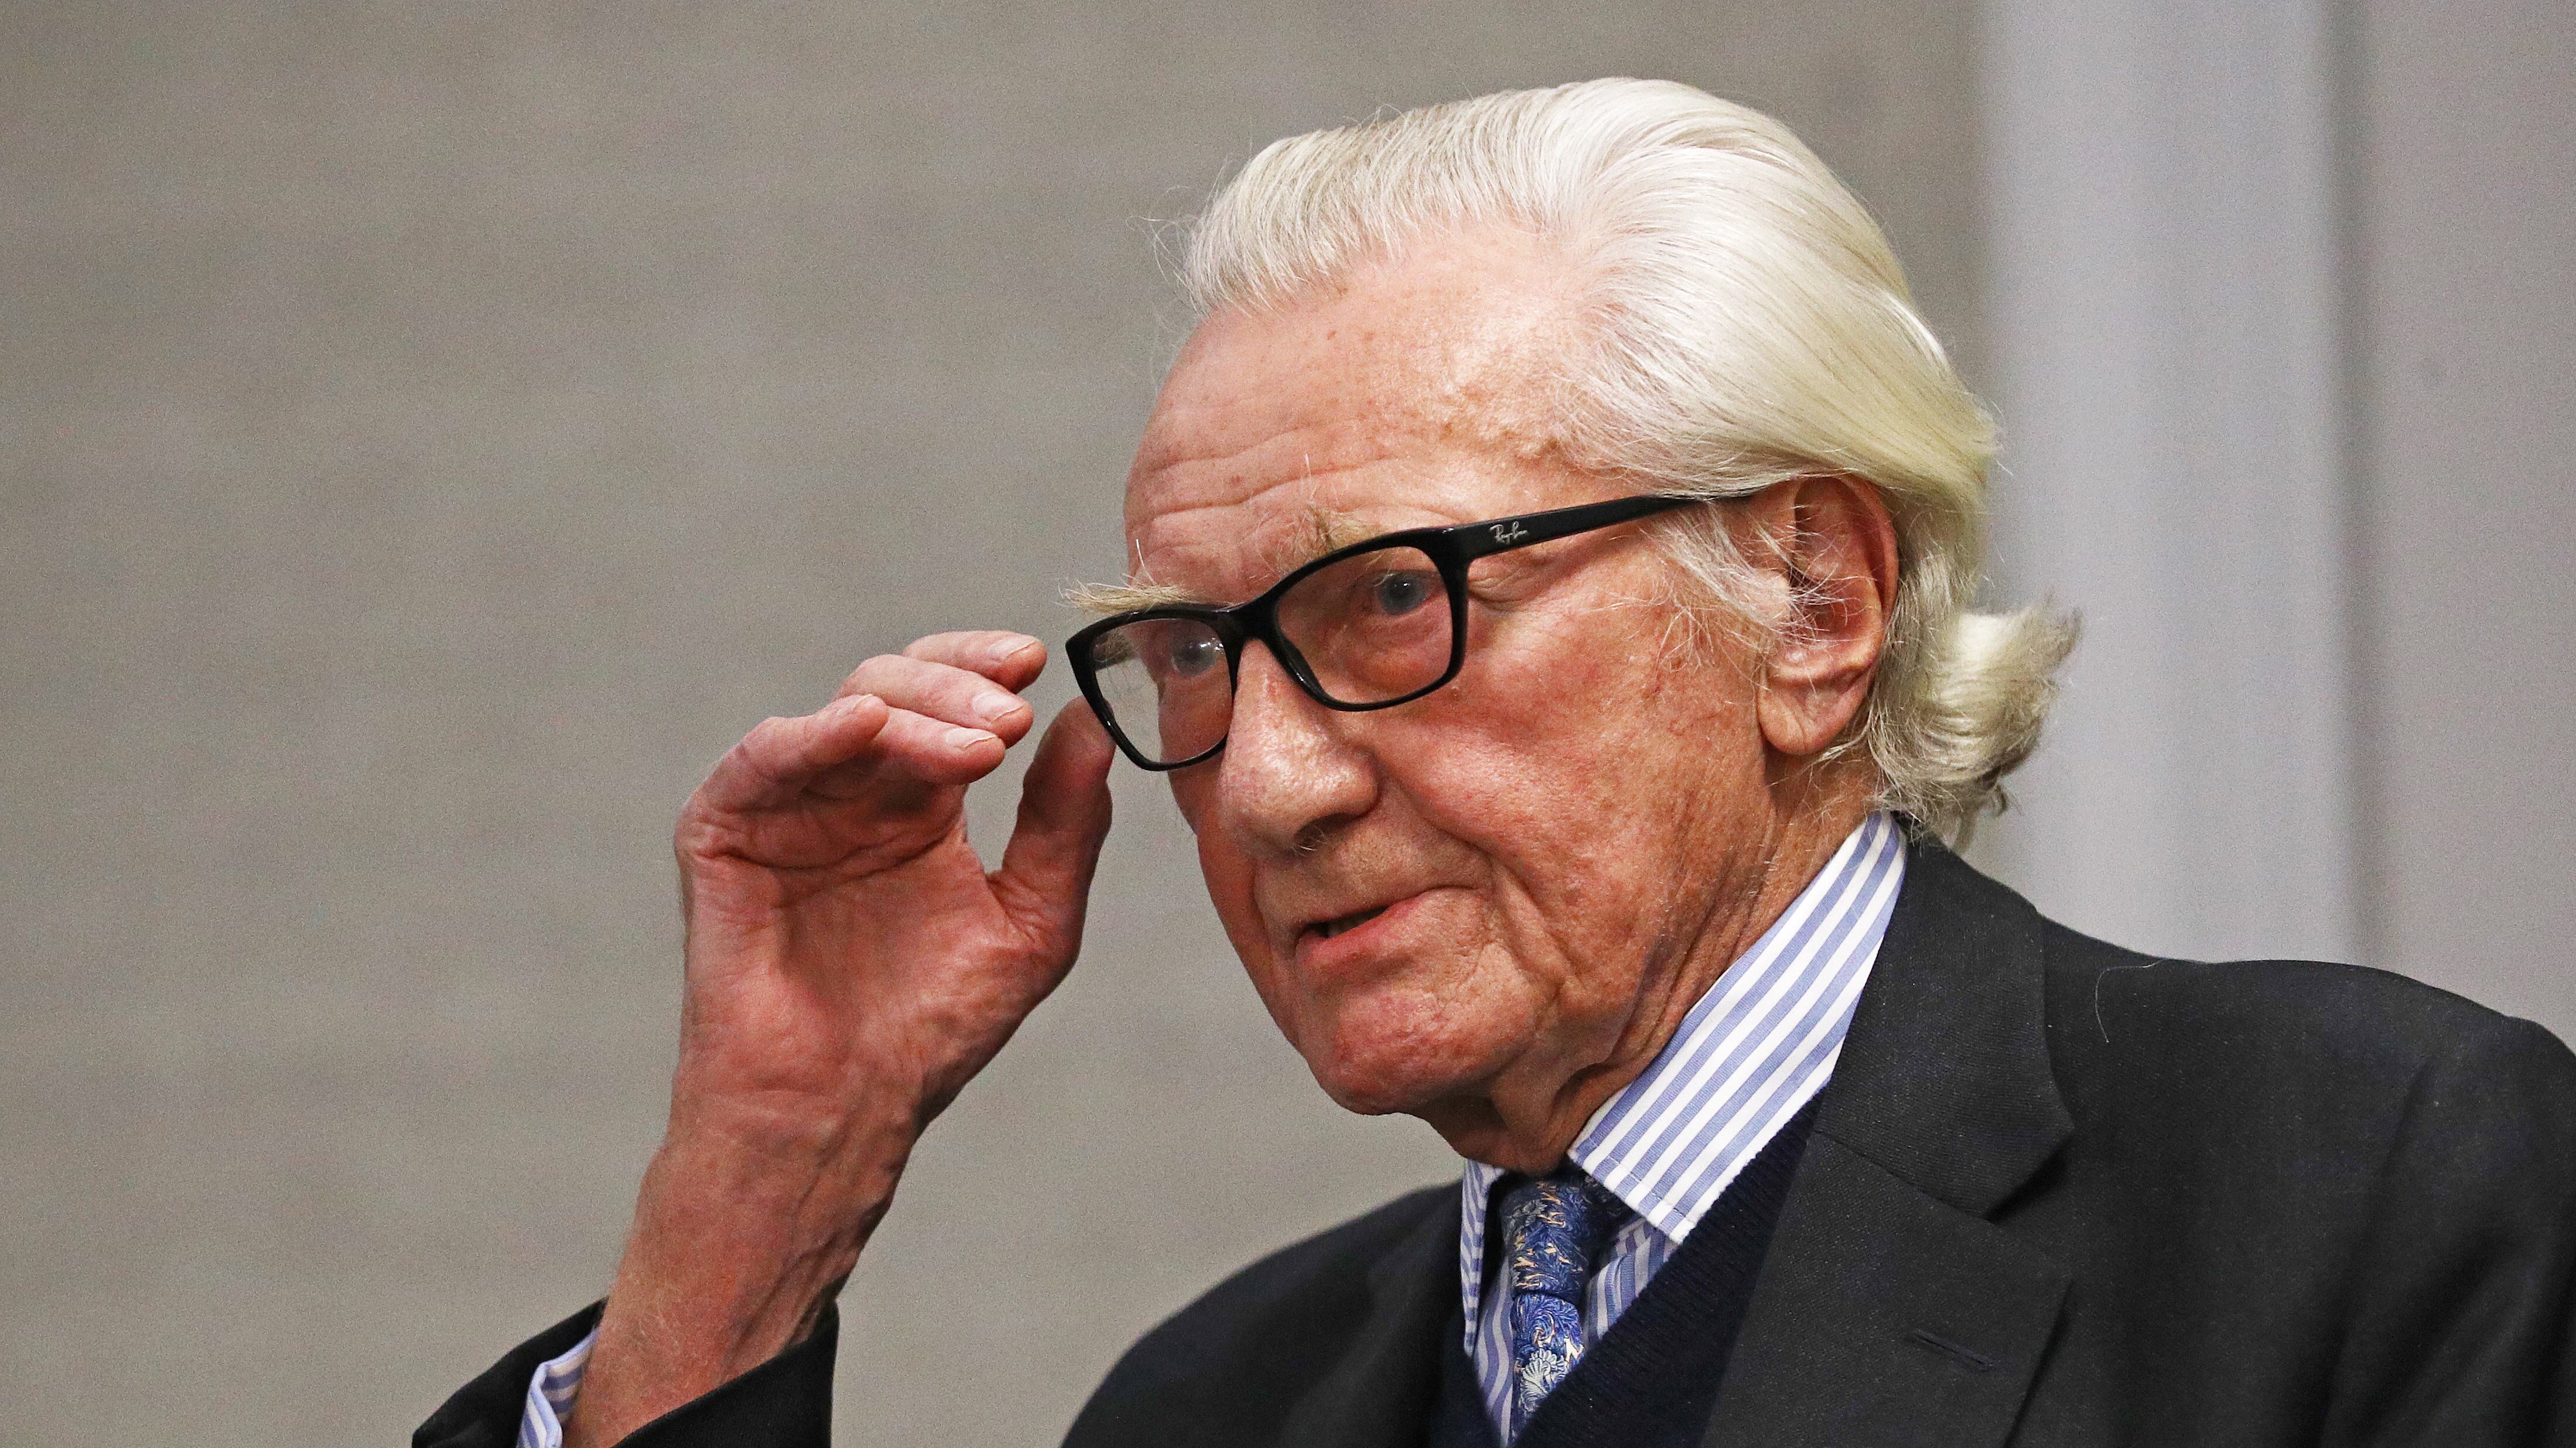 Lord Michael Heseltine warns election campaign will be ‘dishonest’